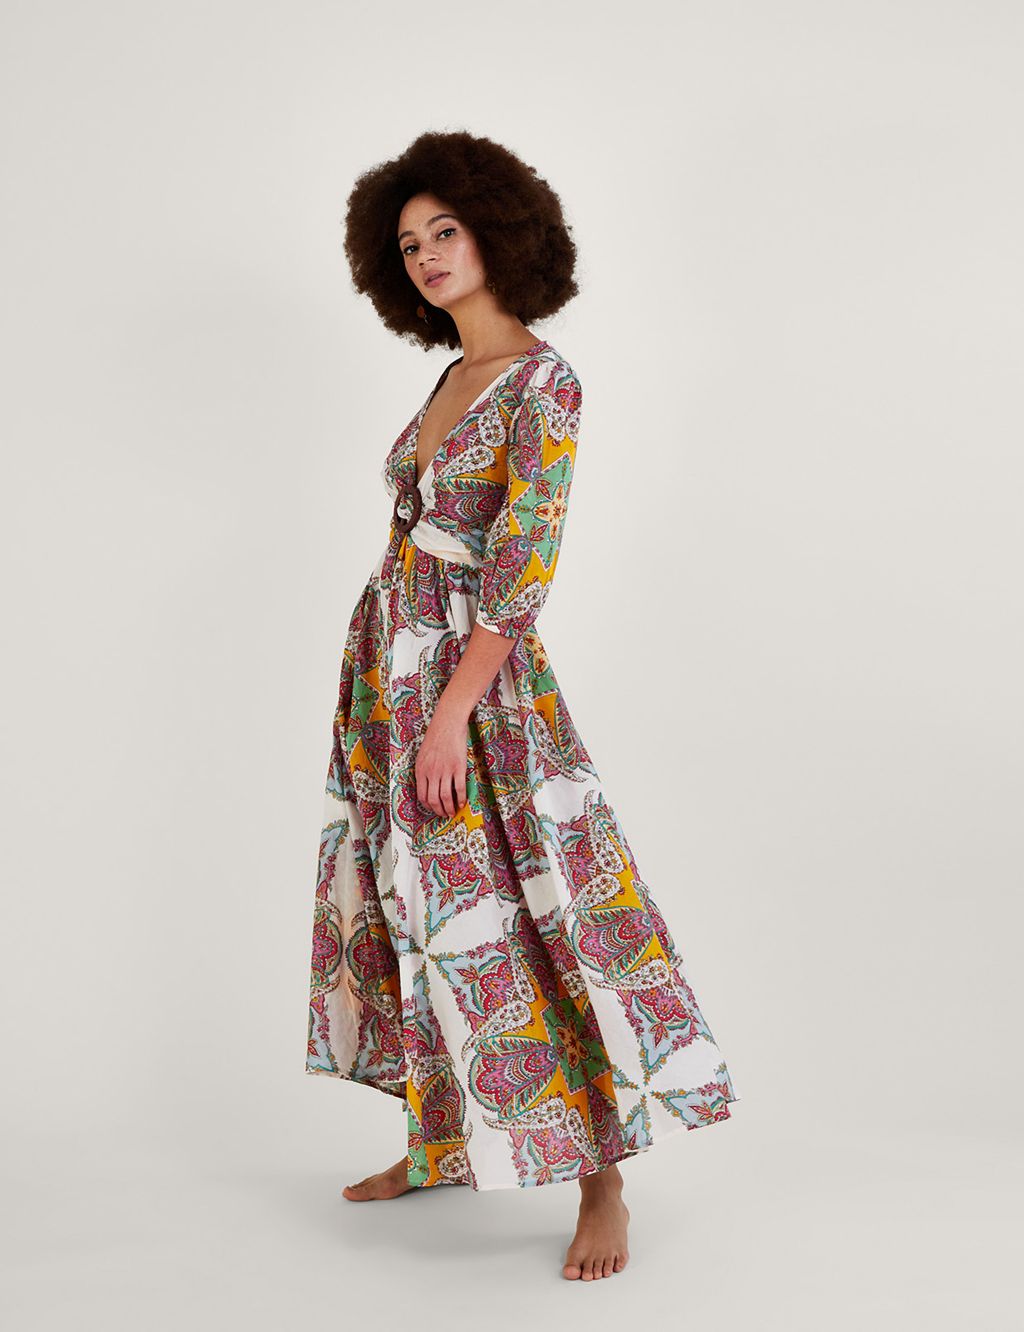 ASOS Maternity Long Sleeve Wrap Maxi Dress in Bold Floral